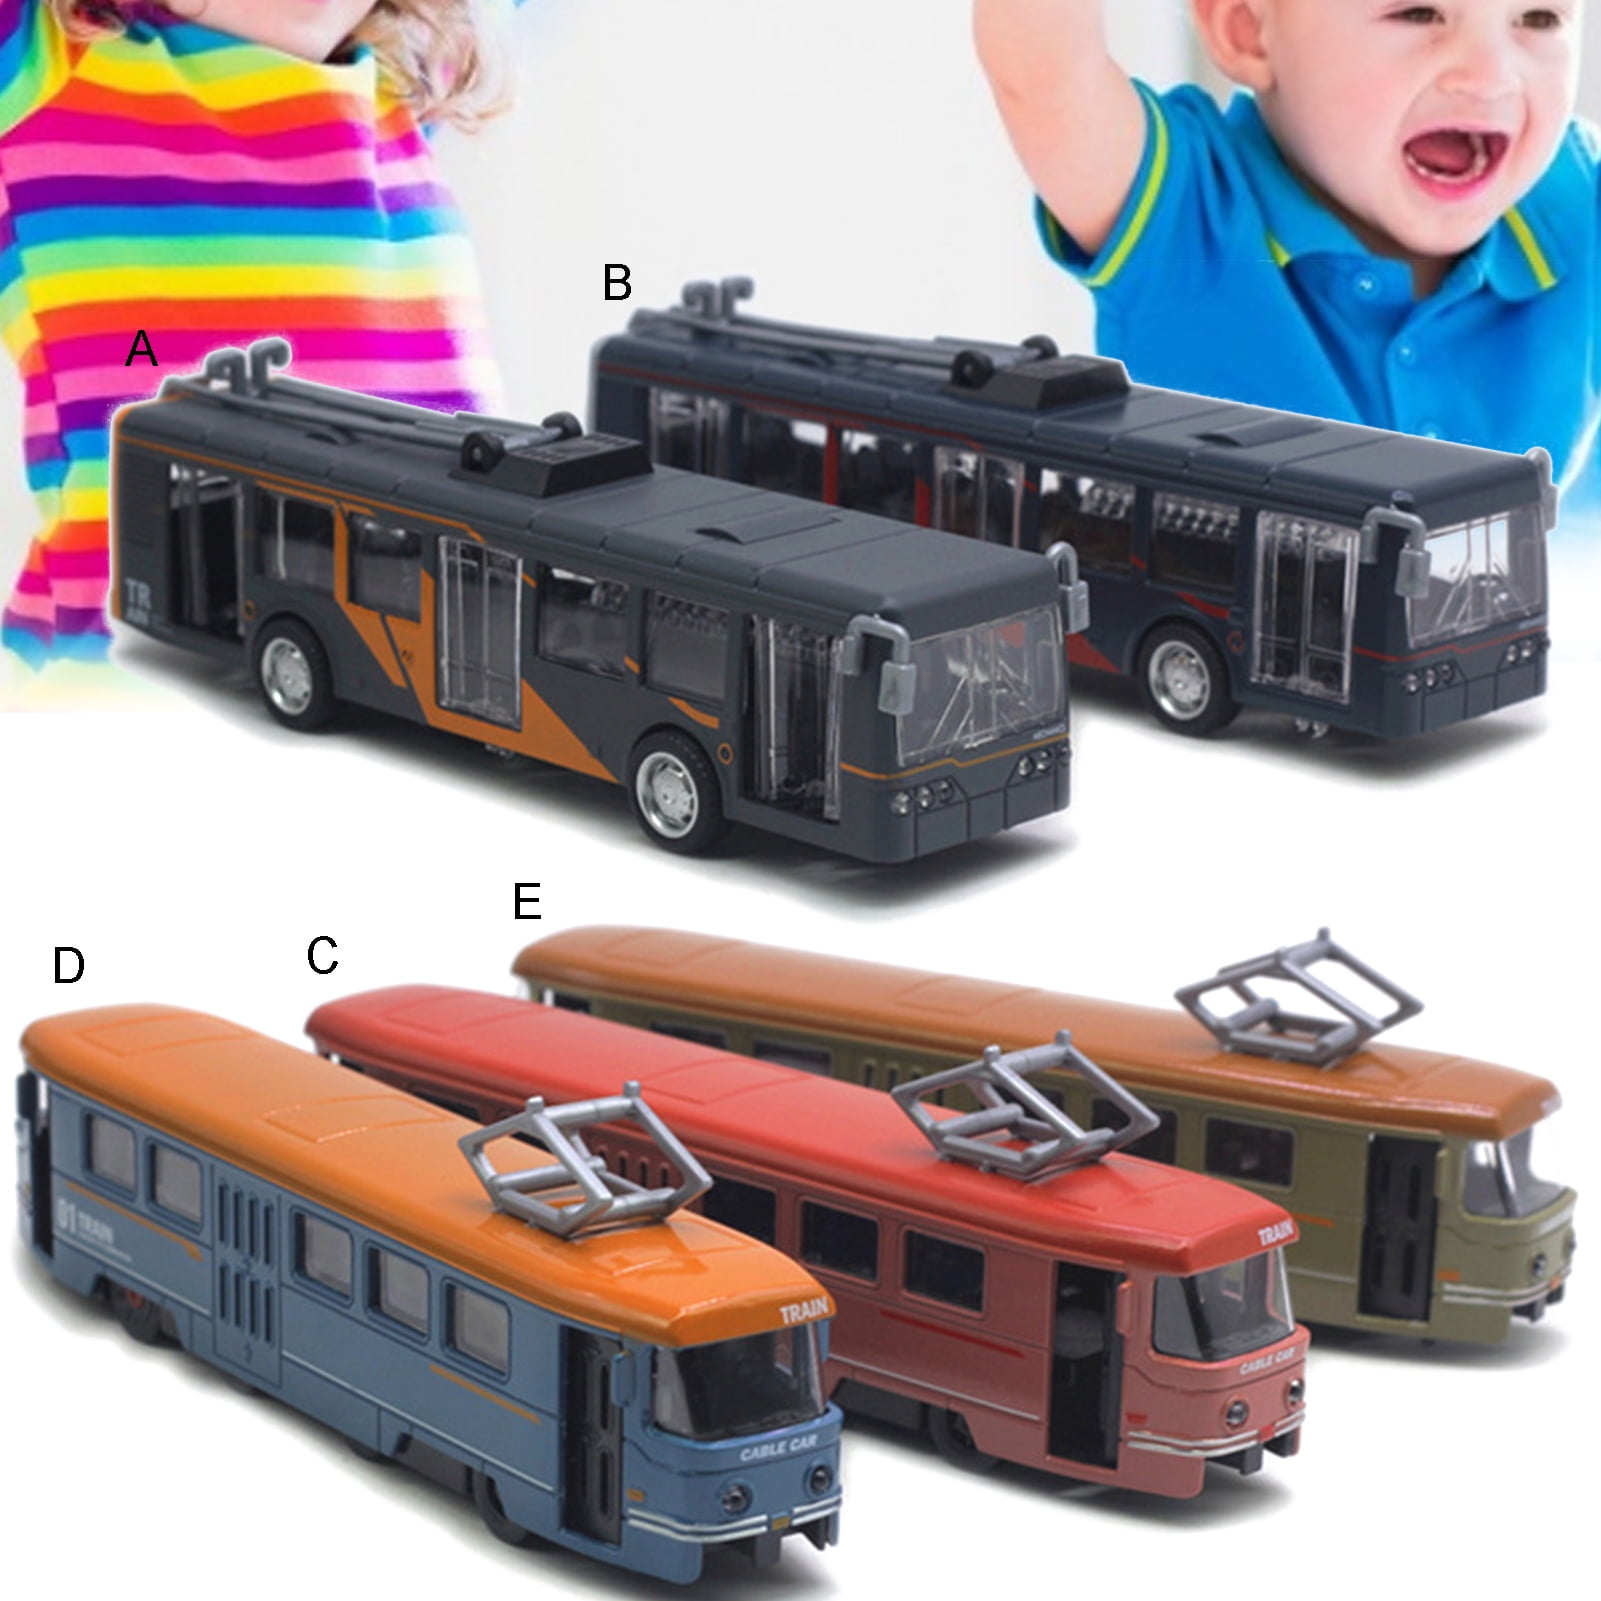 PULABORetro Wind Up Tram Cable Bus Clockwork Street Car Toy Kid Vintage Collection Gift Durable and Useful